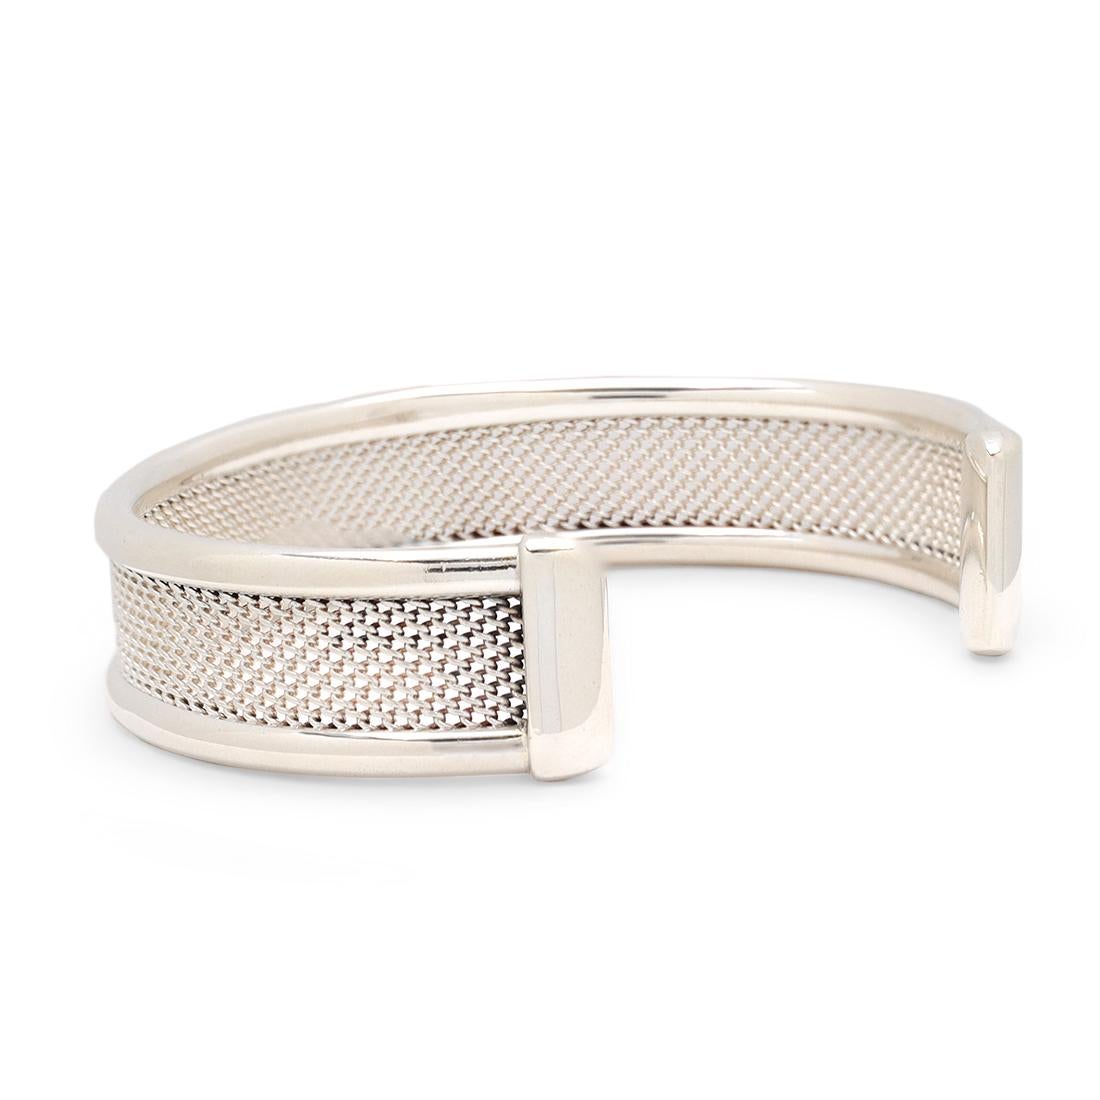 Authentic Tiffany & Co. mesh cuff bracelet crafted in sterling silver. Signed T&Co., 925. The bracelet is presented with the original pouch, no box or papers. CIRCA 1980s.

Bracelet Size: 6 1/4 US
Box: Yes (pouch)
Papers: No